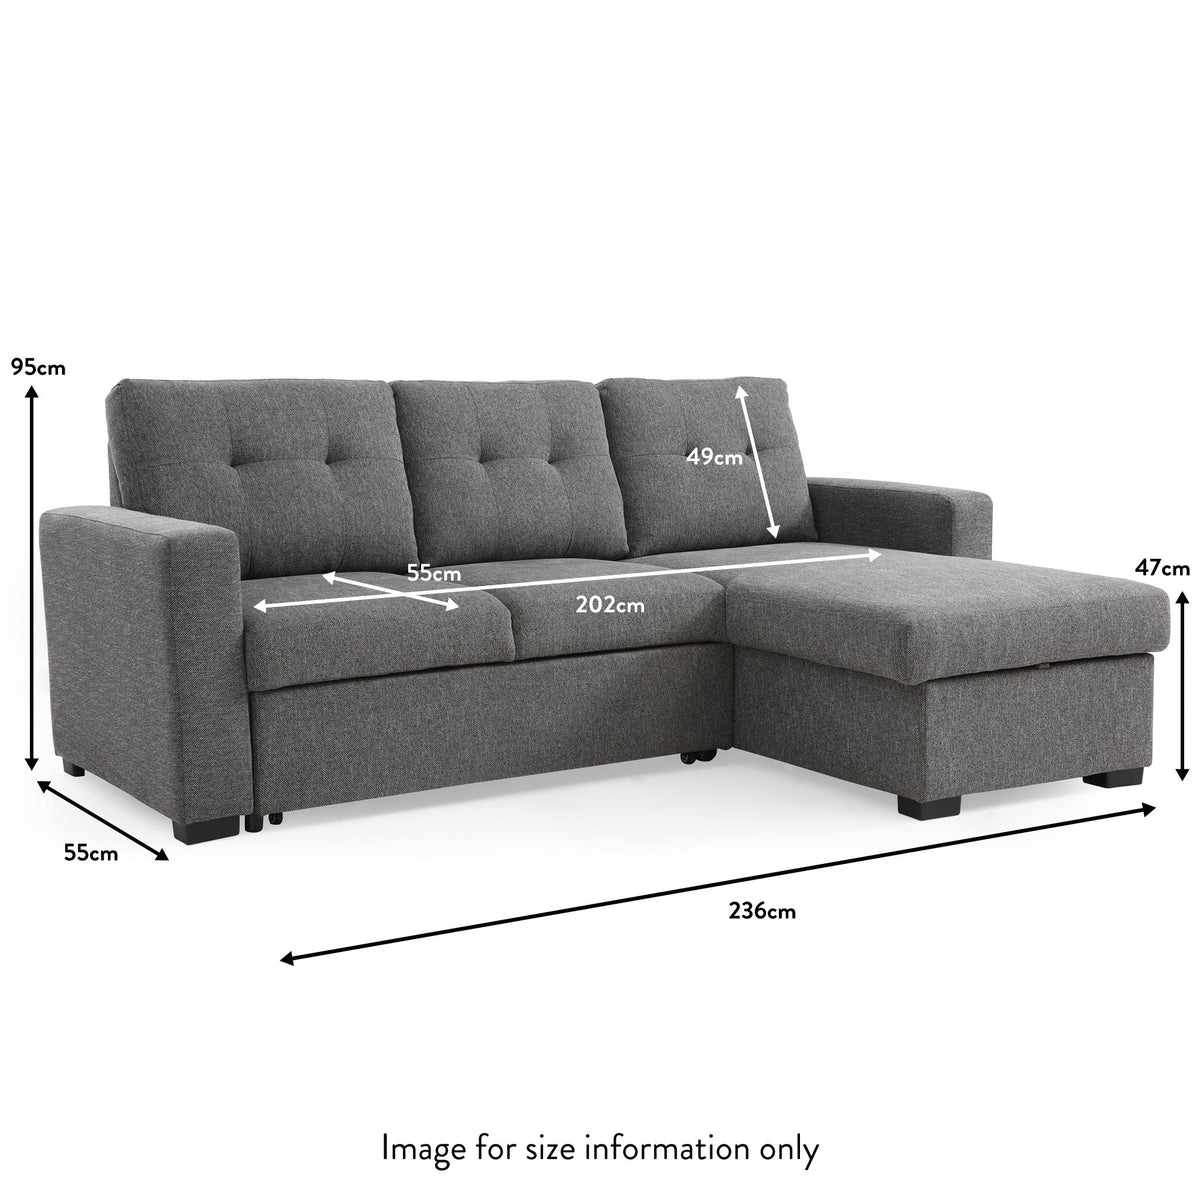 Bosworth Grey 3 Seater Corner Chaise Sofabed